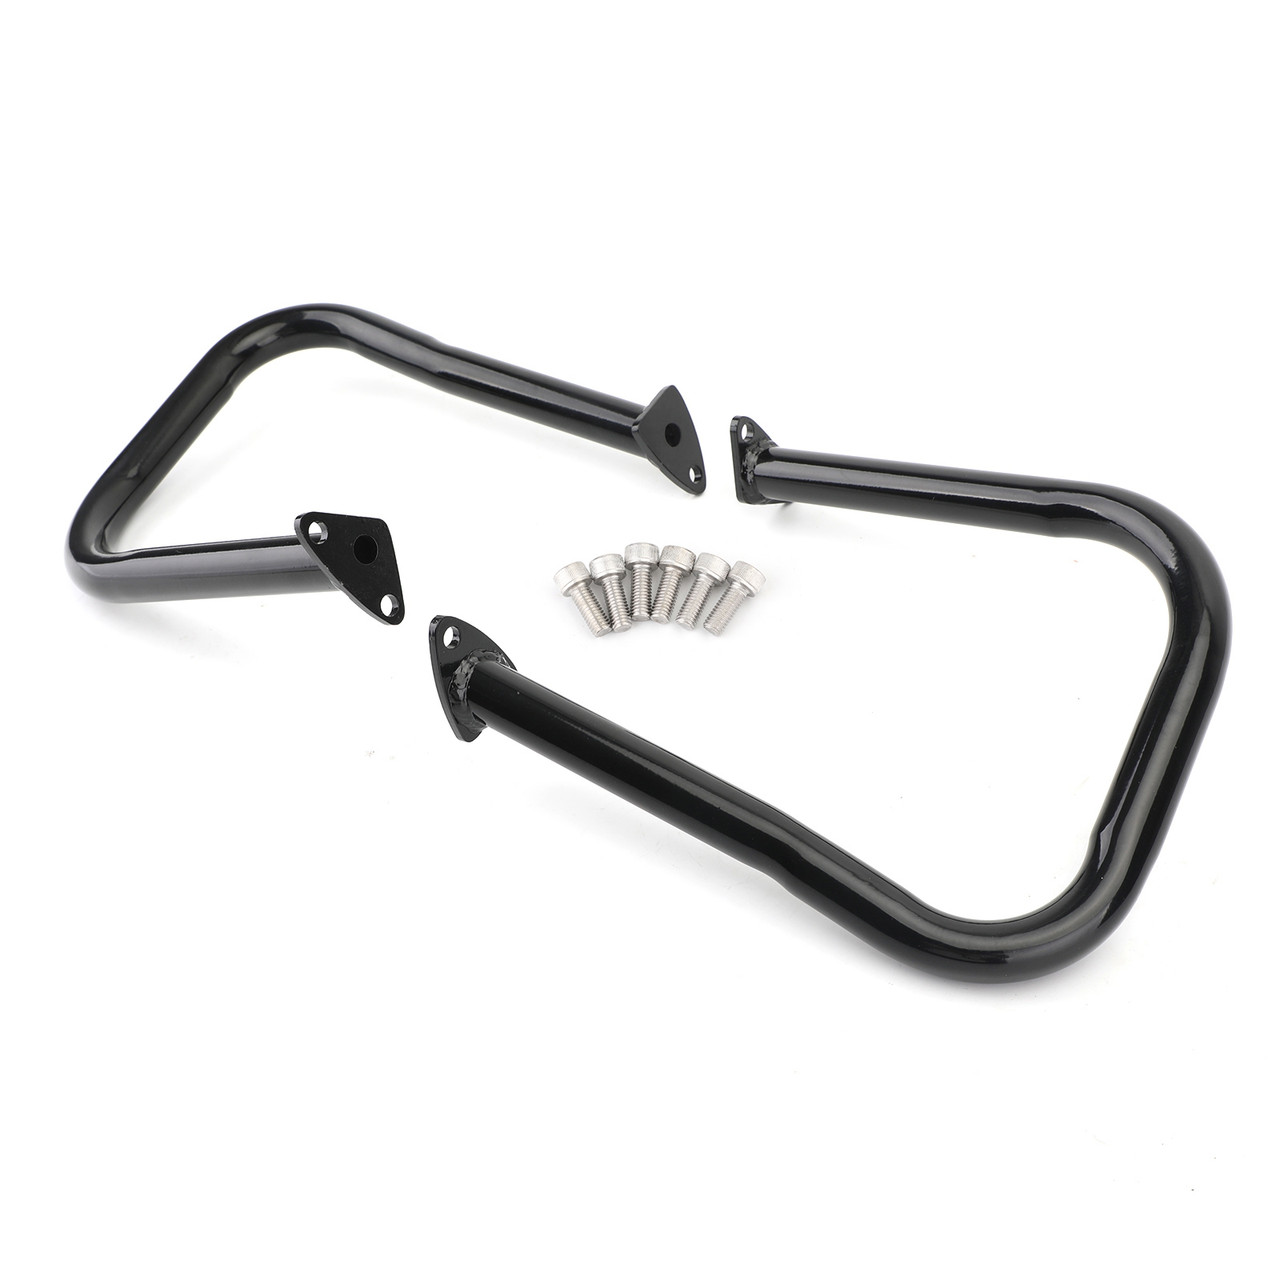 Rear Highway Bars Fit For Indian Chief Classic 14-18 Dark Horse 16-20 Chieftain Classic 18-20 Roadmaster 15-20 Springfield 16-20 Black